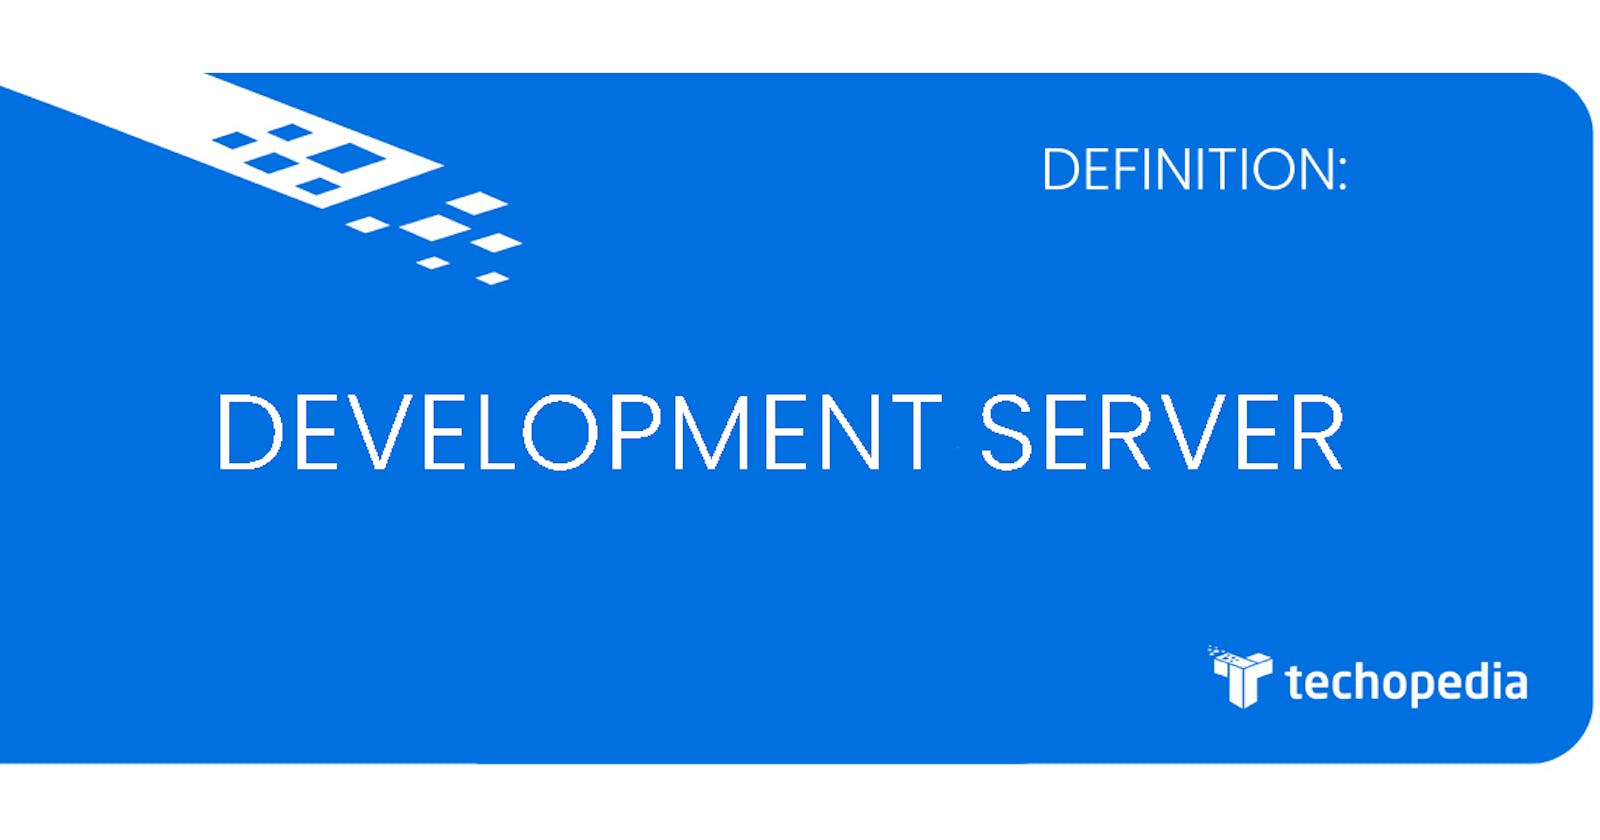 How To Start a Development Server for Your Project